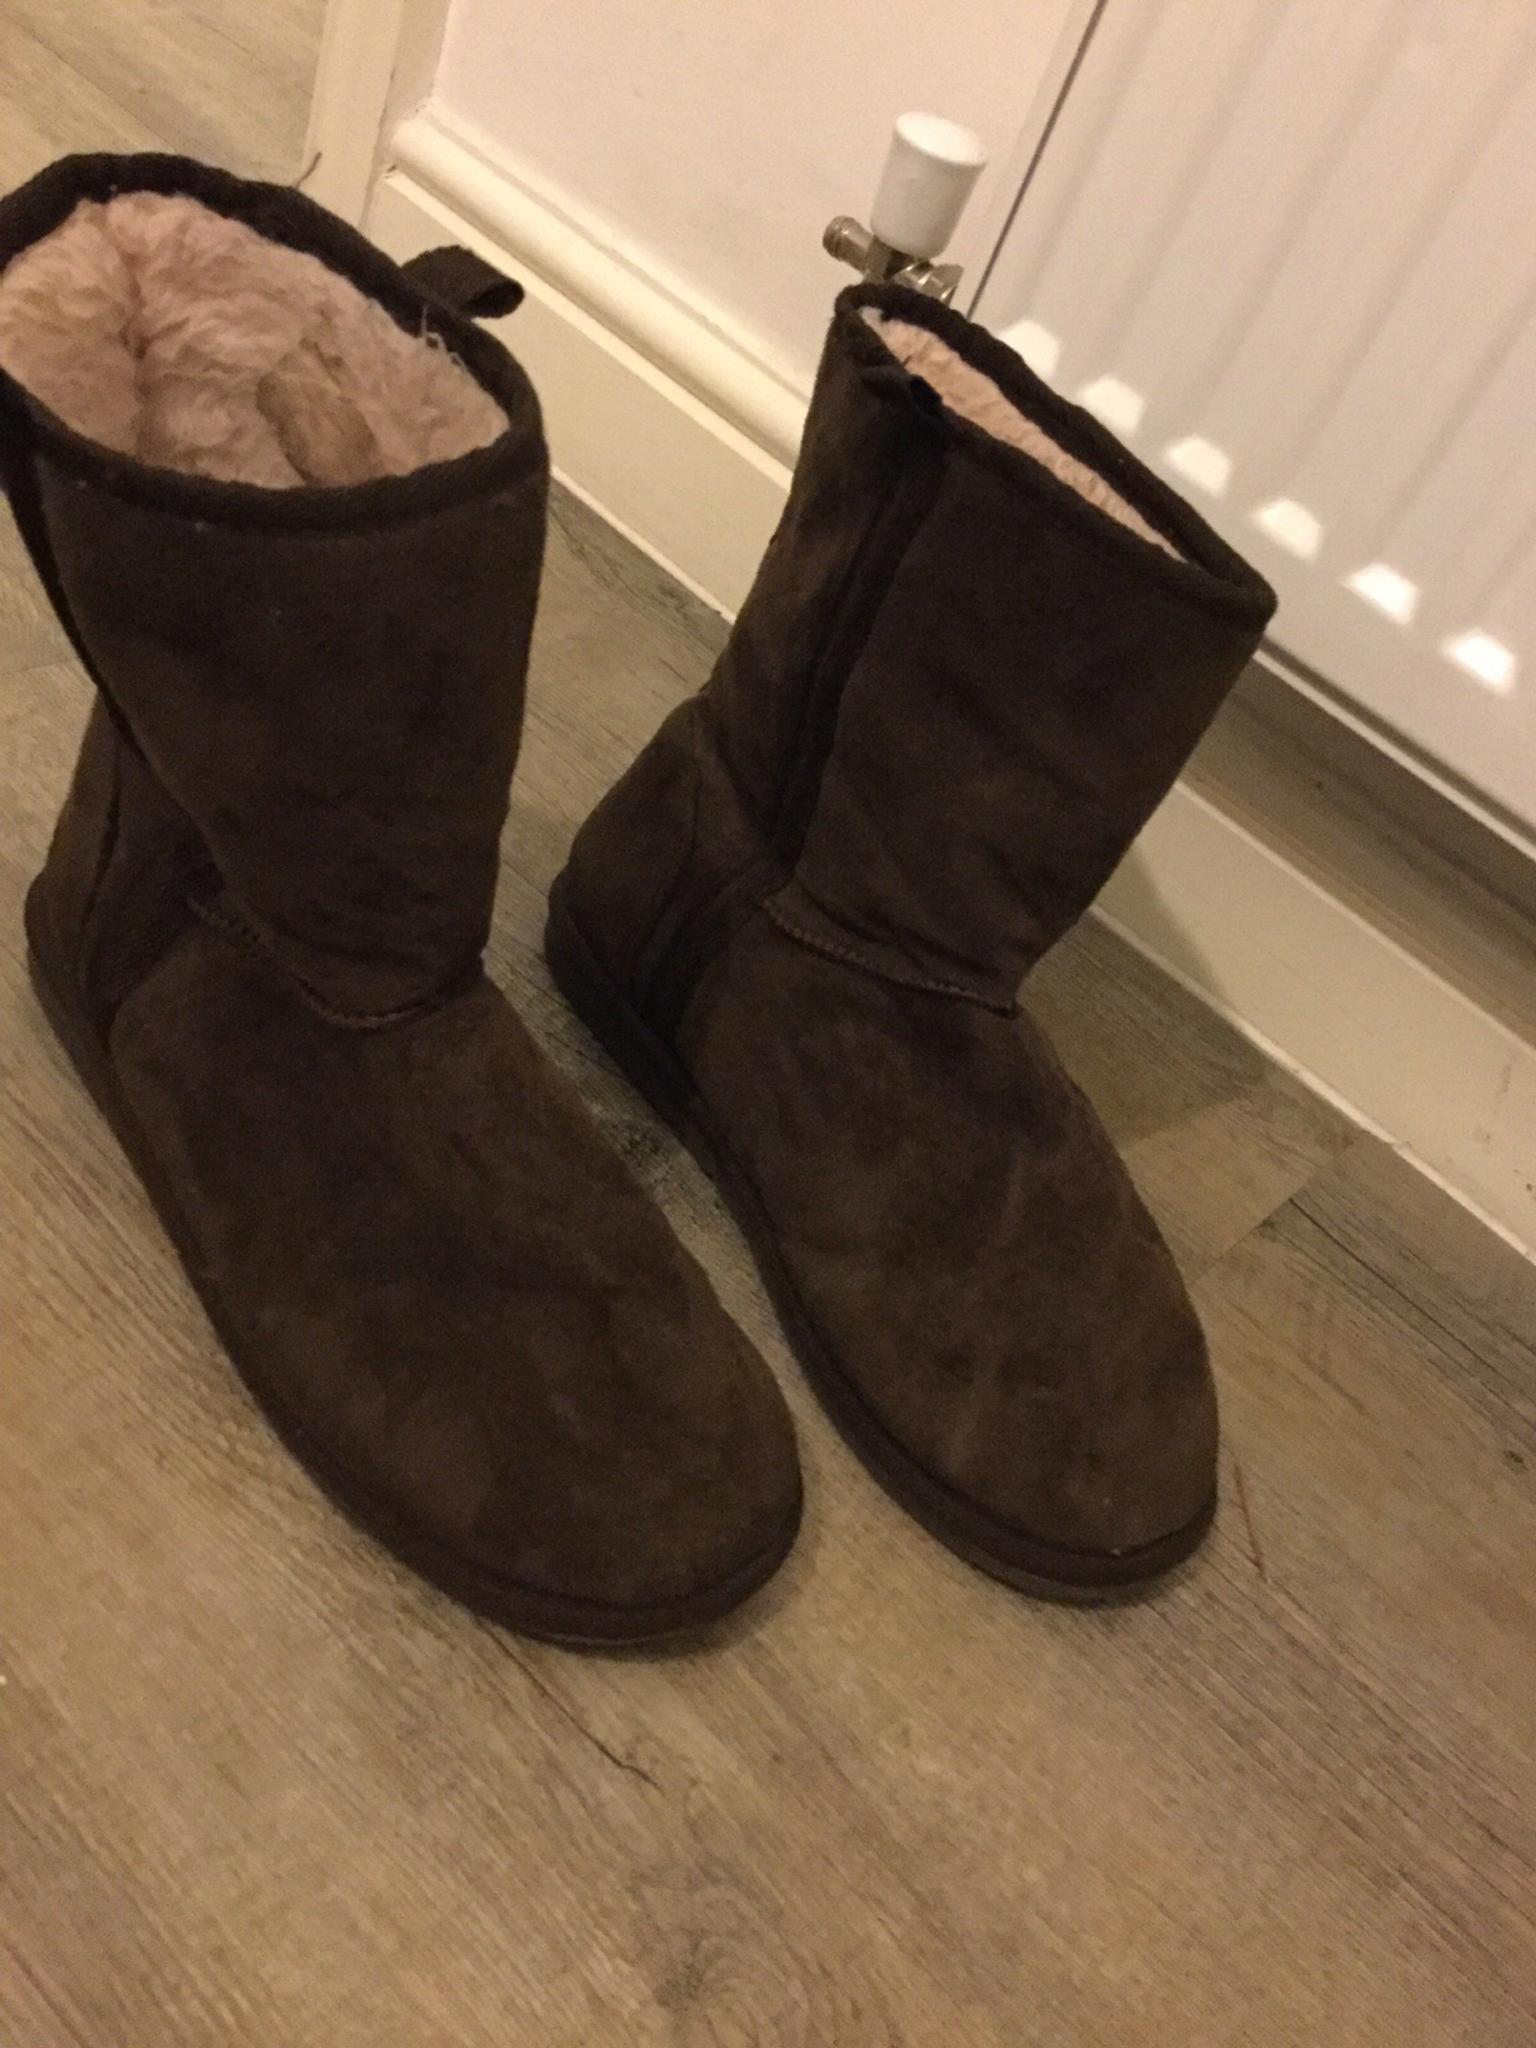 primark ugg style boots